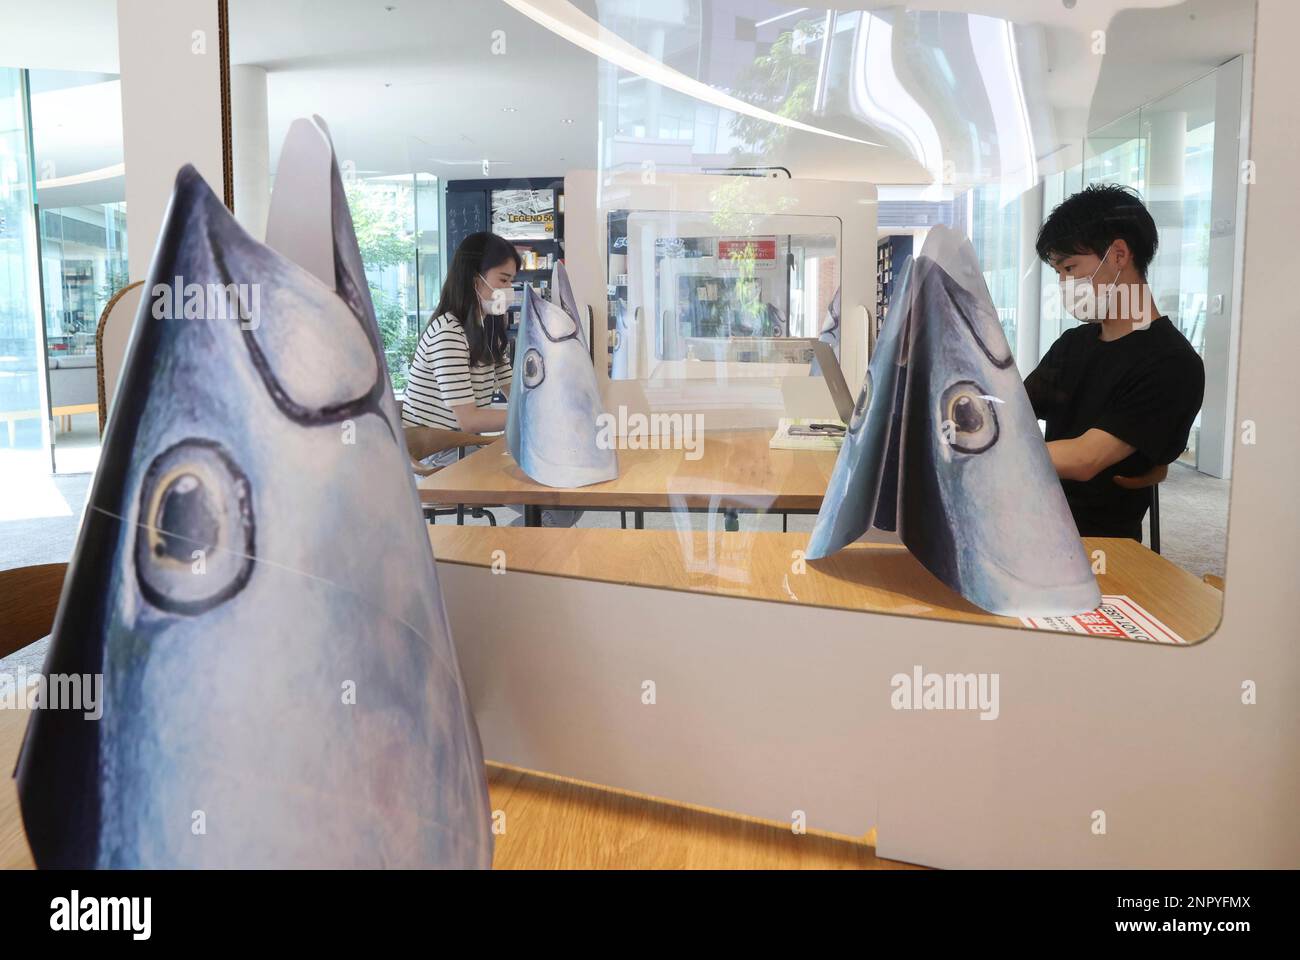 Bluefin tuna-shaped mask covers are laid on a desk to maintain a social distancing at Kinki in Higashi Osaka, Osaka Prefecture June 12, 2020. The university has led the world's